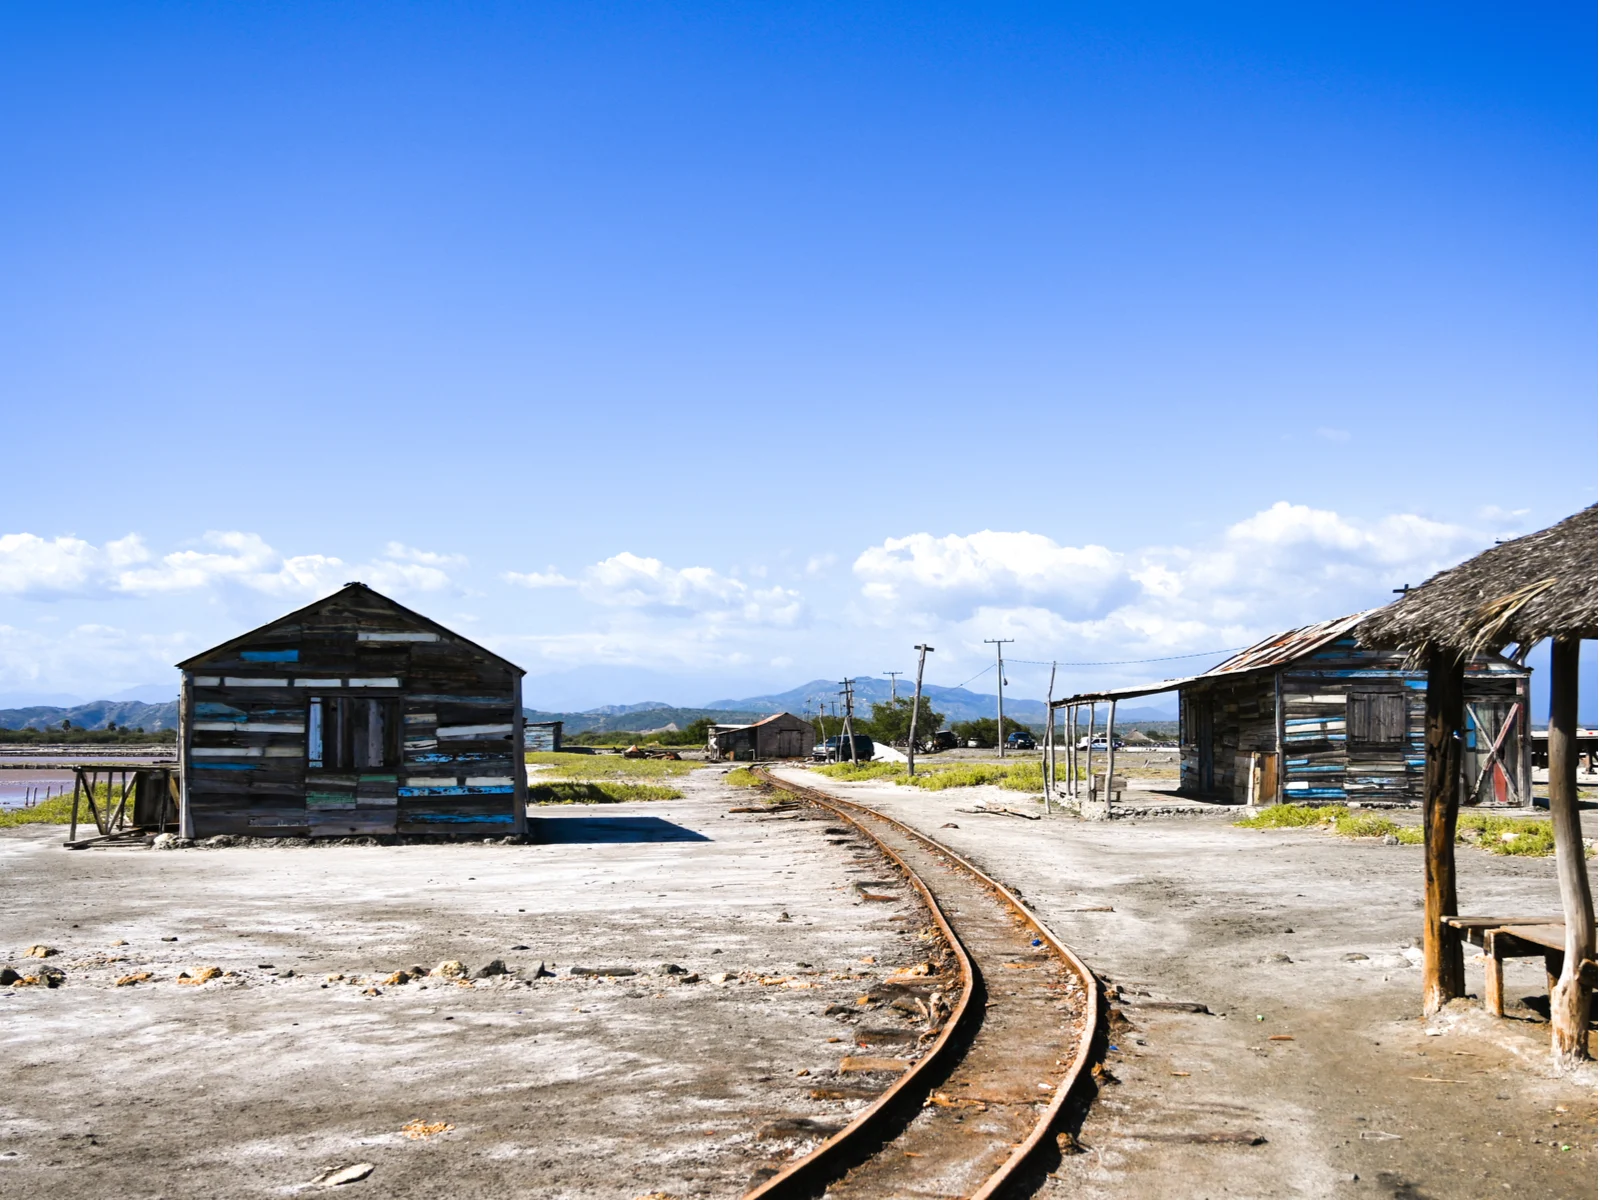 An amazing view of railroad tracks in the salt mines in Salinas, one of the best things to do in the Dominican Republic